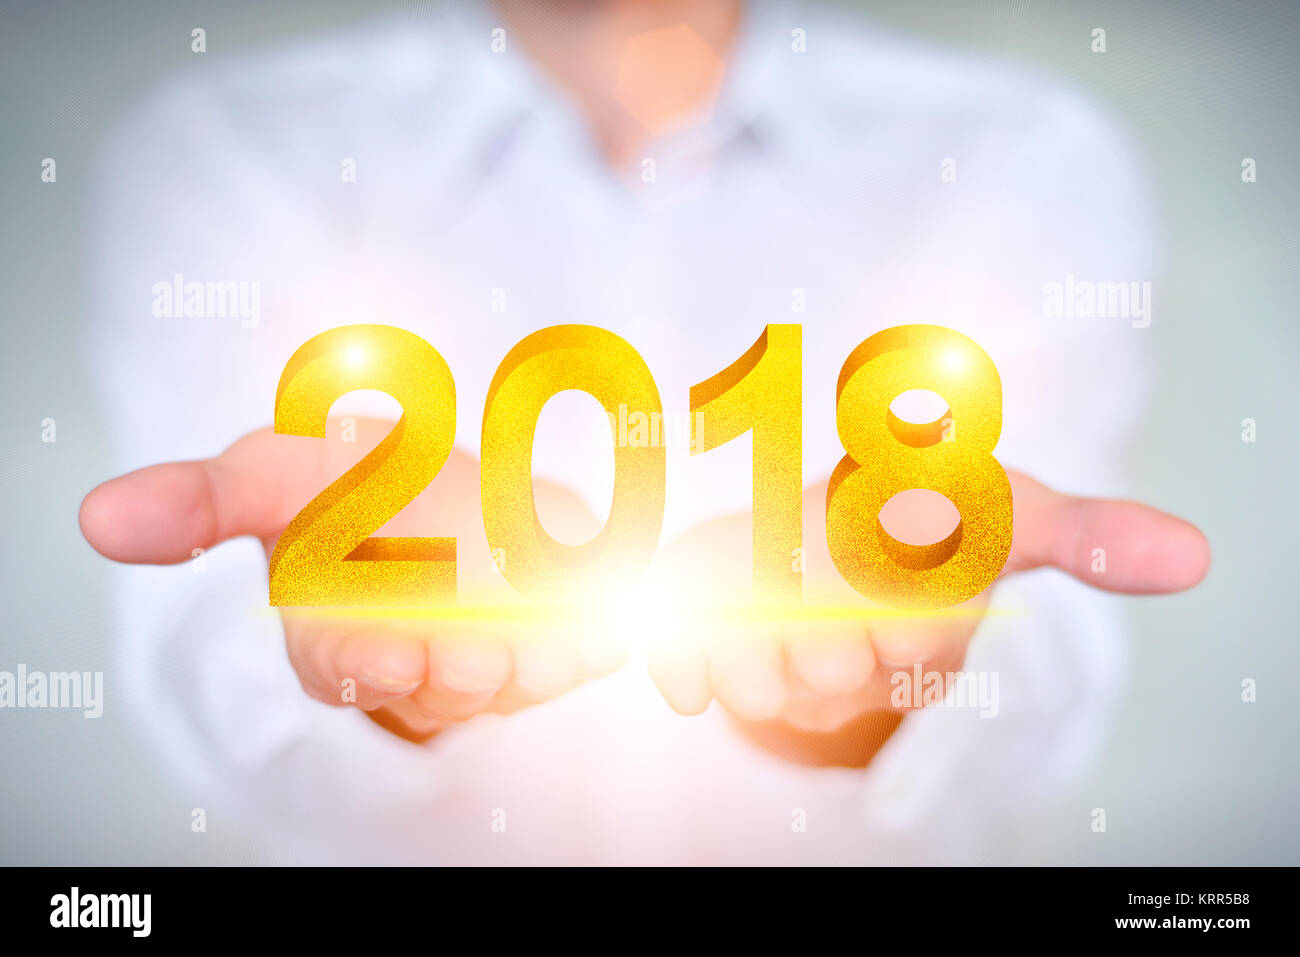 The businessman hands gold 2018 Stock Photo